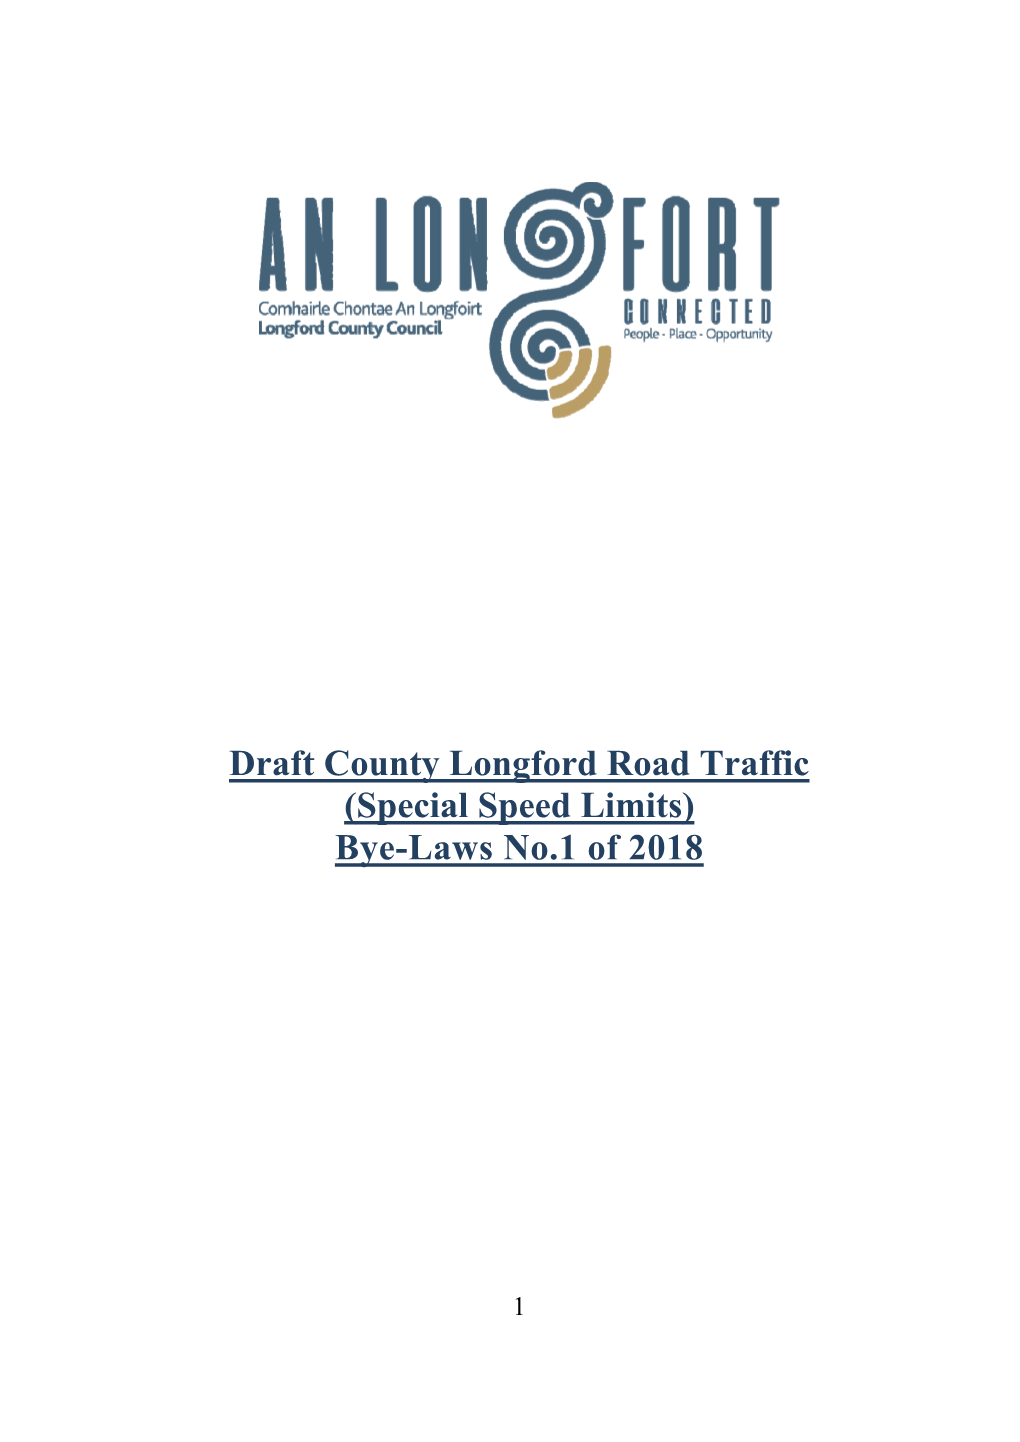 Draft County Longford Road Traffic (Special Speed Limits) Bye-Laws No.1 of 2018